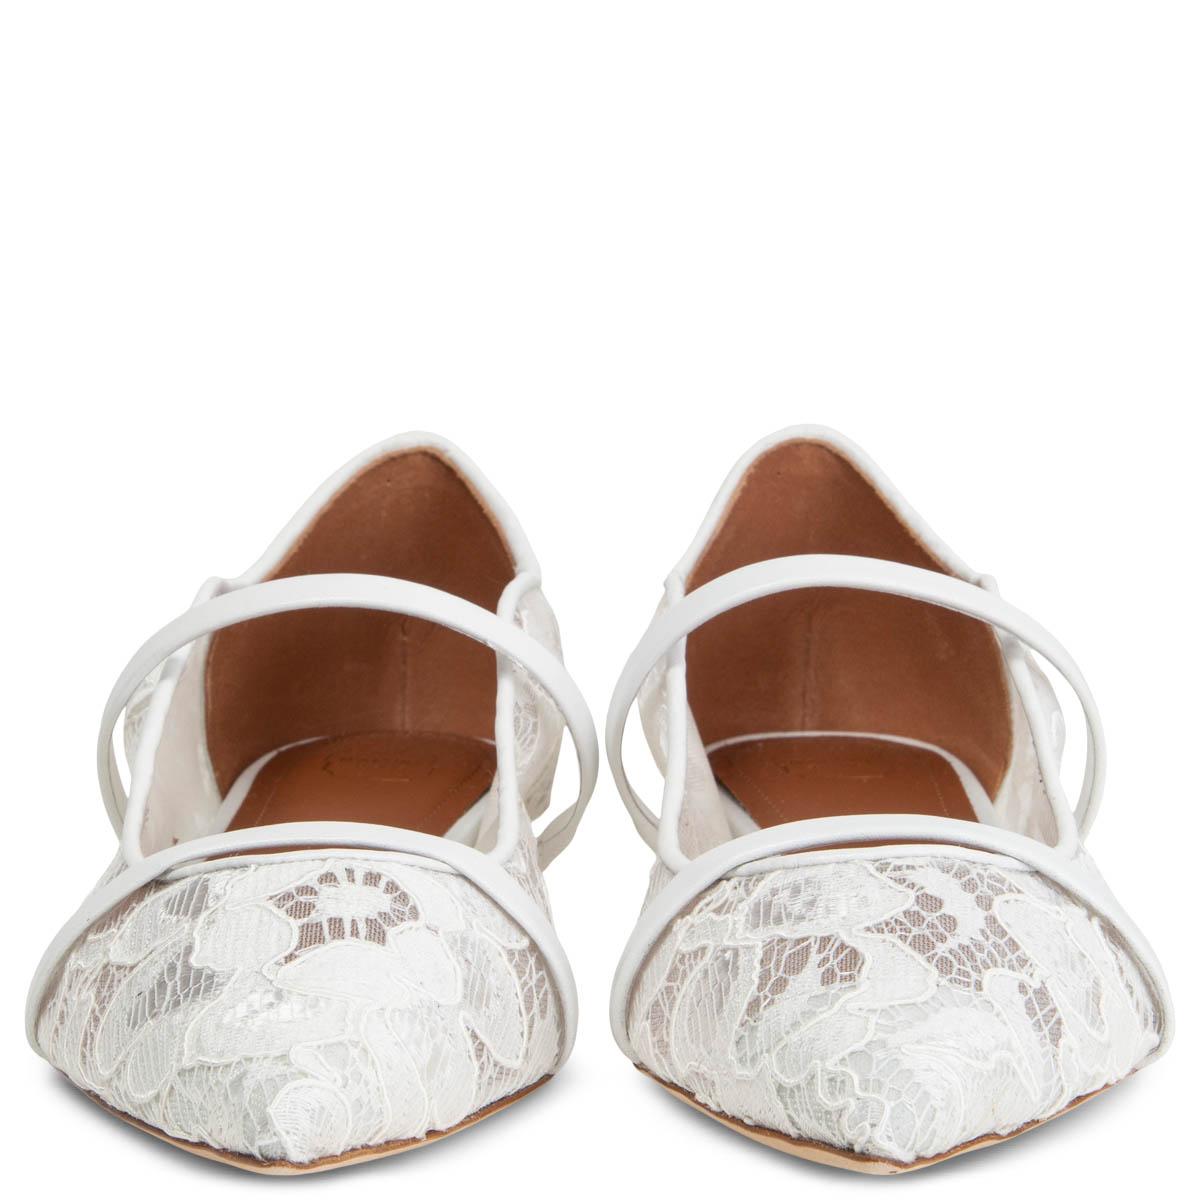 100% authentic Malone Souliers's for my Theresa Maureen point-toe ballet flats made from white floral lace and the label's customary double-strap design in white leather. Brand new. Come with dust bag. 

Measurements
Imprinted Size	38.5
Shoe